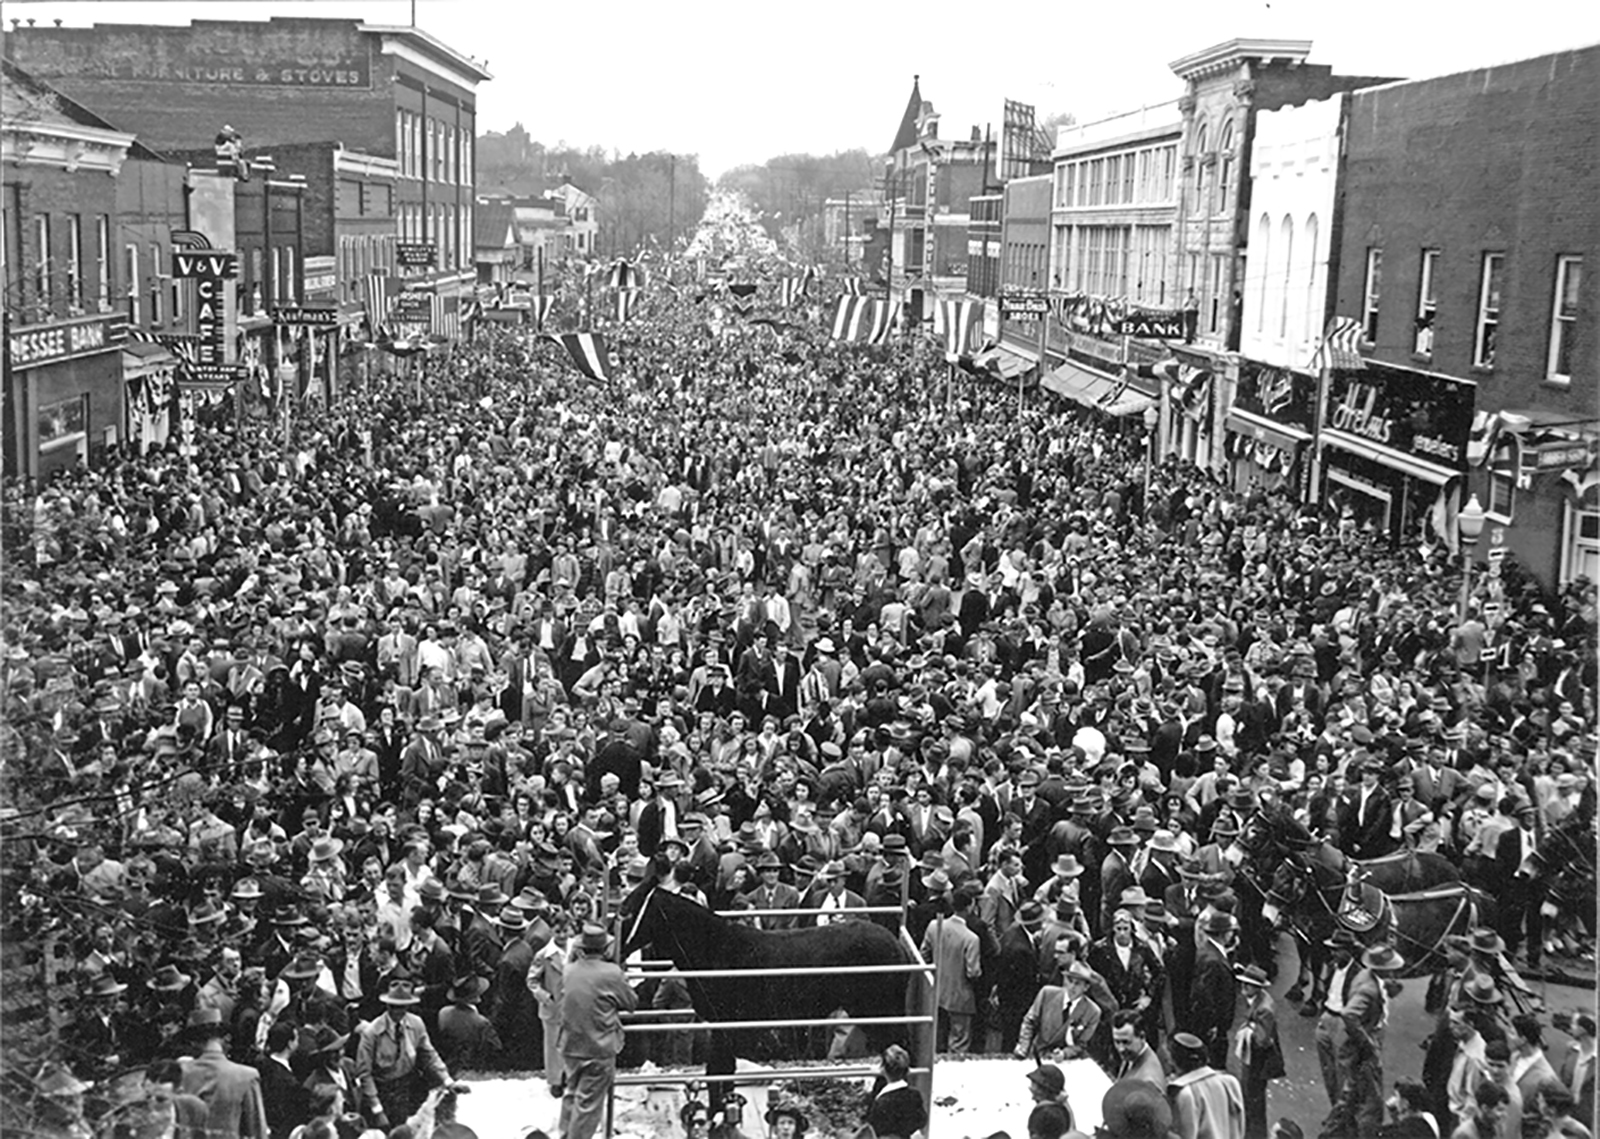 Black and white historical photo of a huge, closely packed crowd on the square in downtown Columbia, TN, stretching back for over a block.